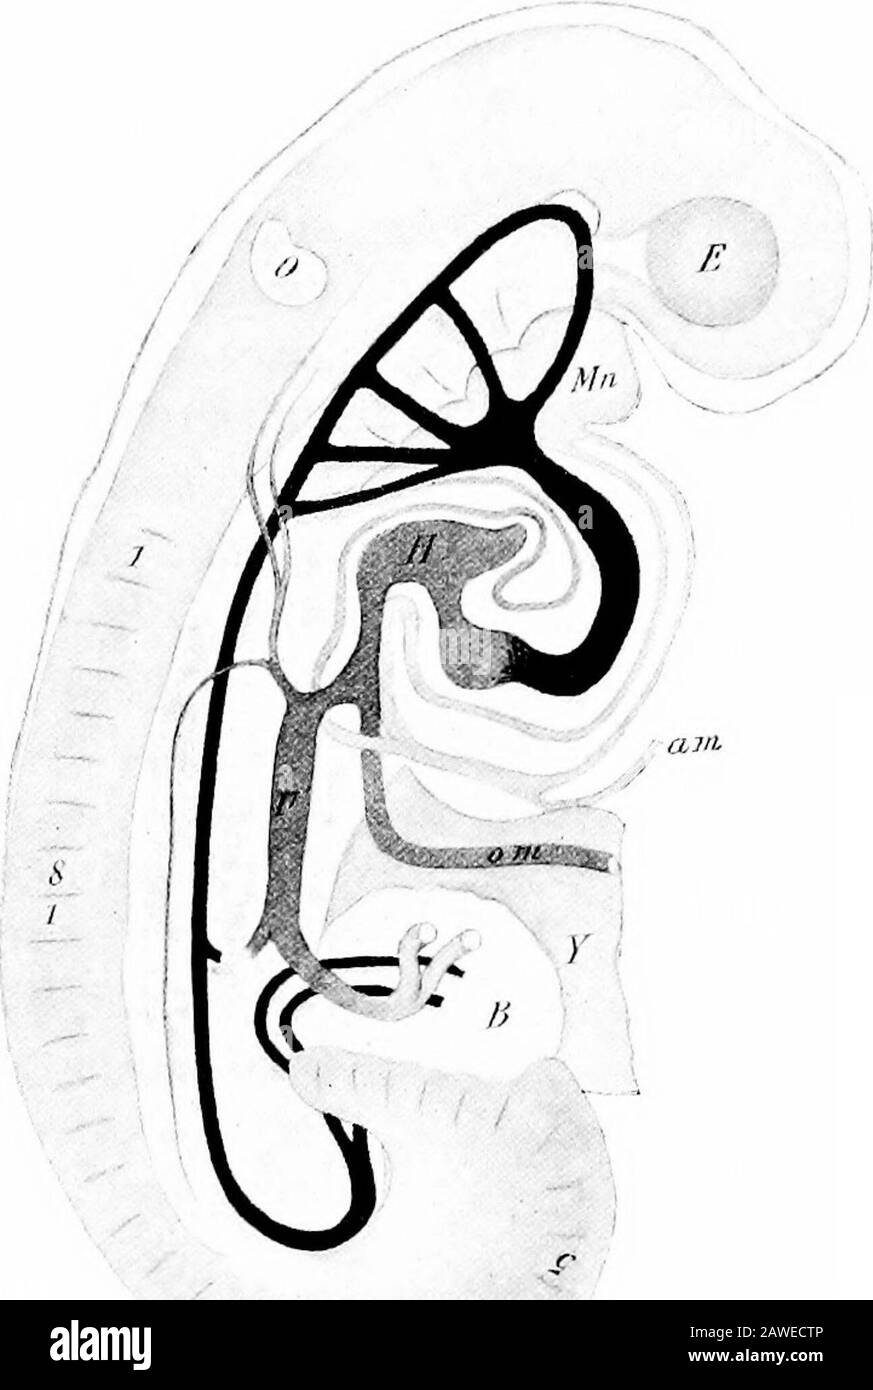 The development of the human body; a manual of human embryology . nulus of Vieus-sens (Fig. 131). This process continuing, the dorsal por-tion of the auricular septum finally overlaps the free edgeof the annulus, and after birth the fusion of the overlap-ping surfaces takes place and the foramen is completelyclosed. In a large percentage (25 to 30 per cent.) of individuals thefusion of the surfaces of the septum and annulus is not complete,so that a slit-like opening persists between the two auricles.This, however, does not allow of any mingling of the blood inthe two cavities, since when the Stock Photo